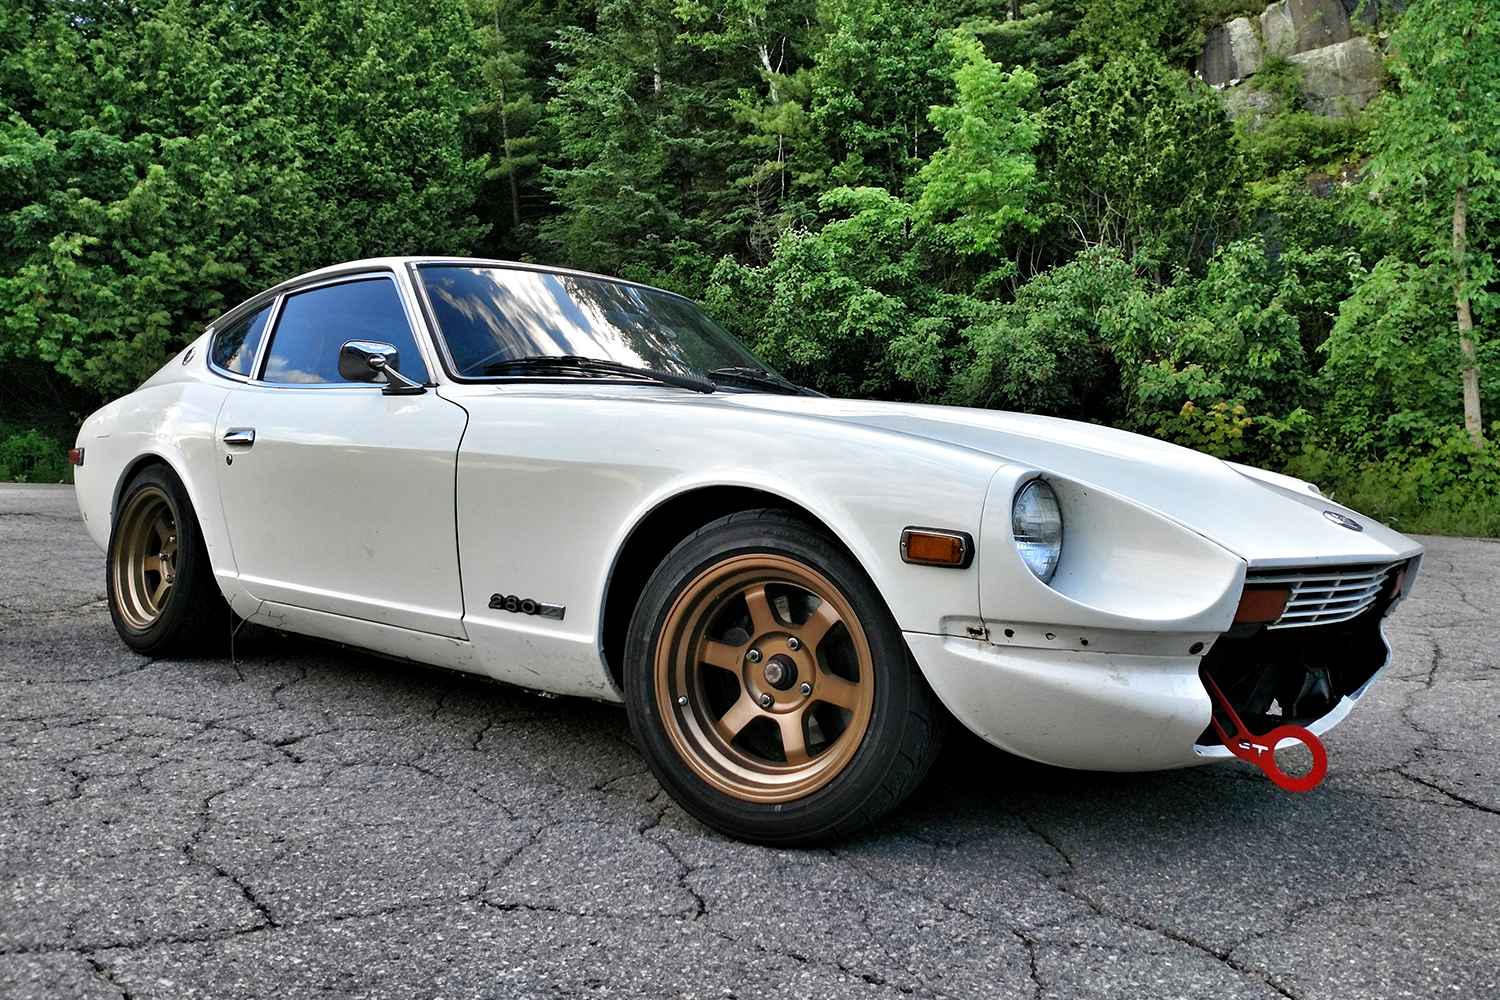 What to Know Before Buying a 1978 Datsun 280Z - InsideHook